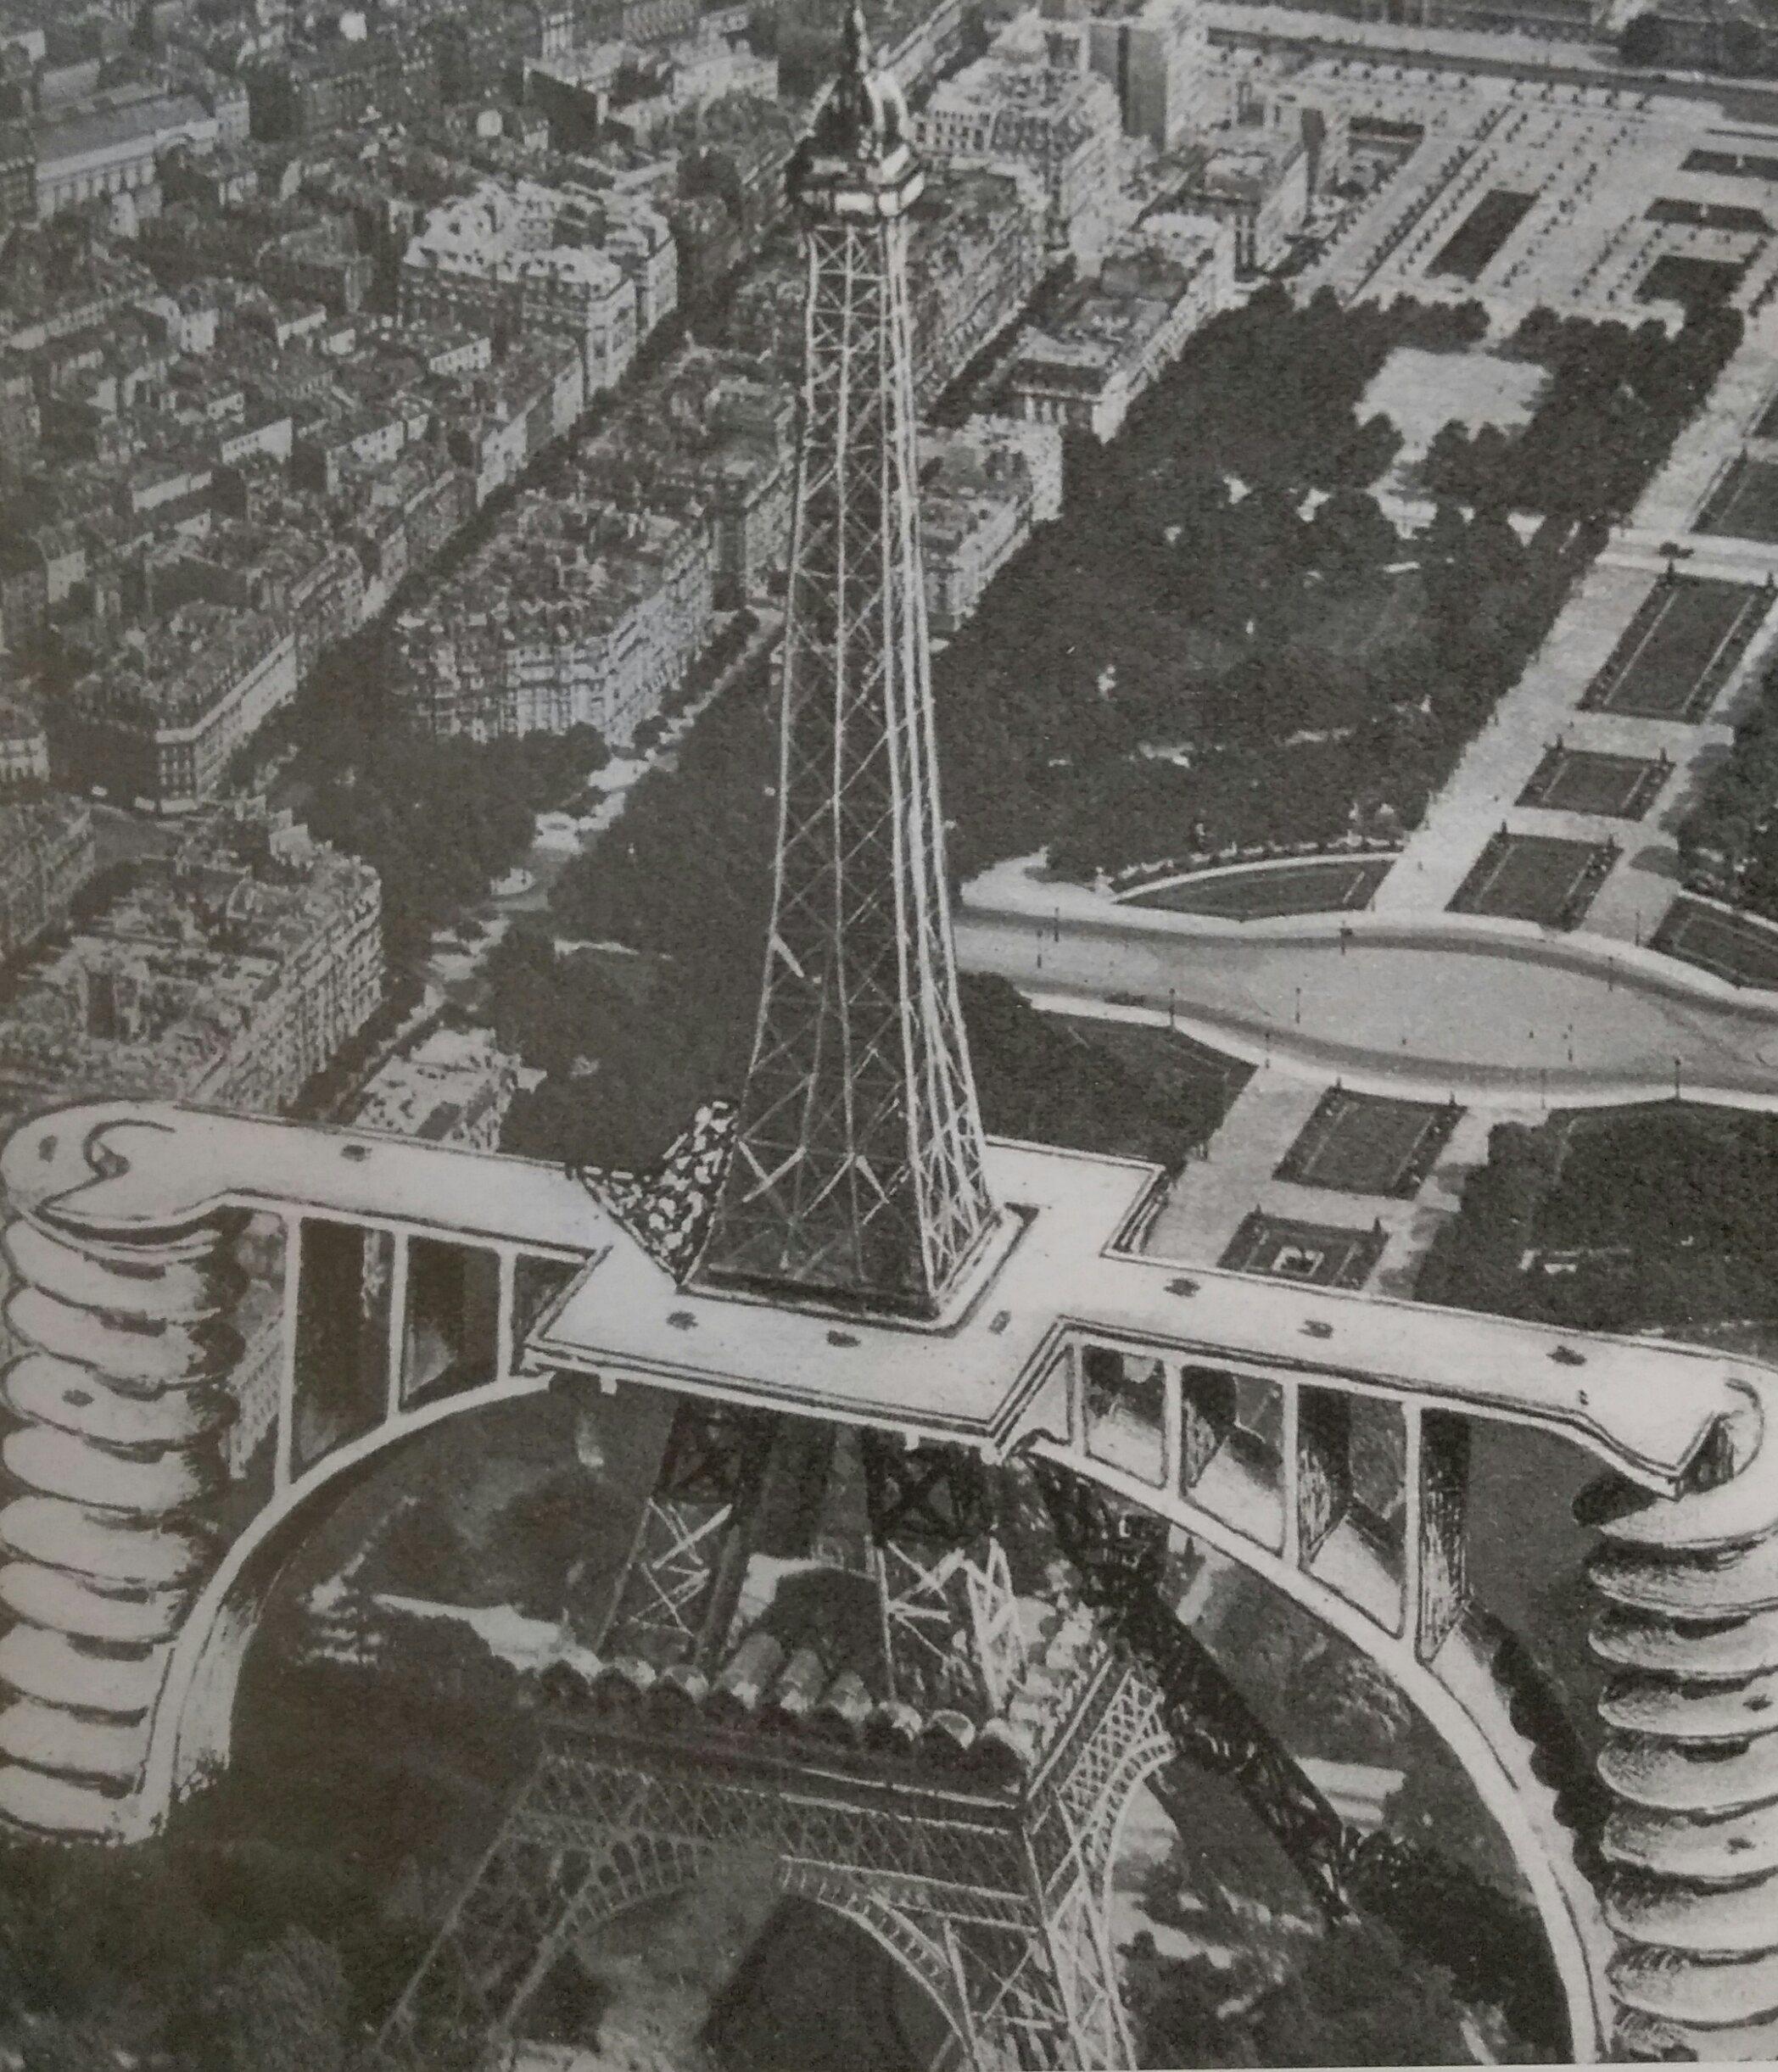 In 1936, andré basdevant proposed a project to make the eiffel tower's second floor accessible by car. The idea faced technical challenges and was never realized, but it highlighted the era's innovative spirit.